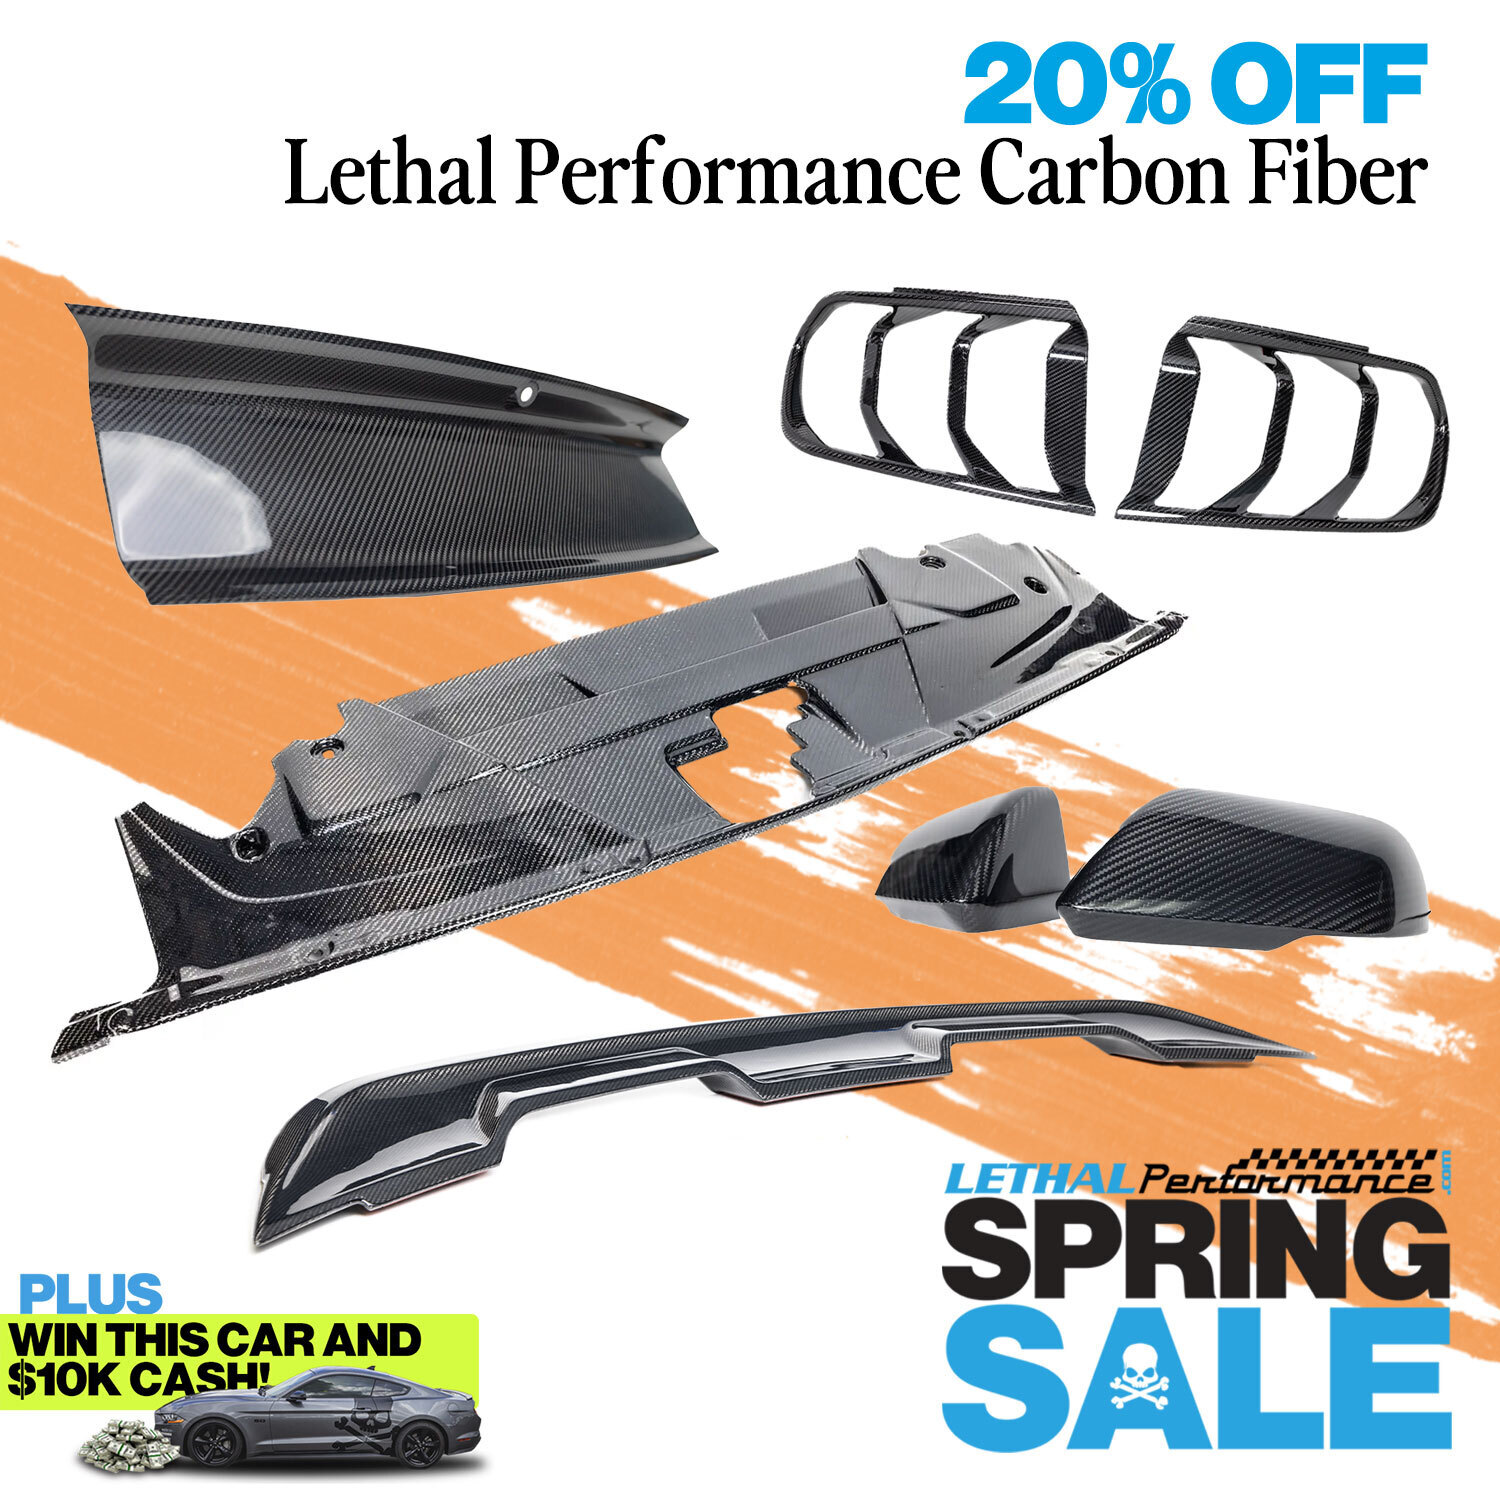 S650 Mustang All Lethal Performance Carbon 20% Off! springsale_carbon